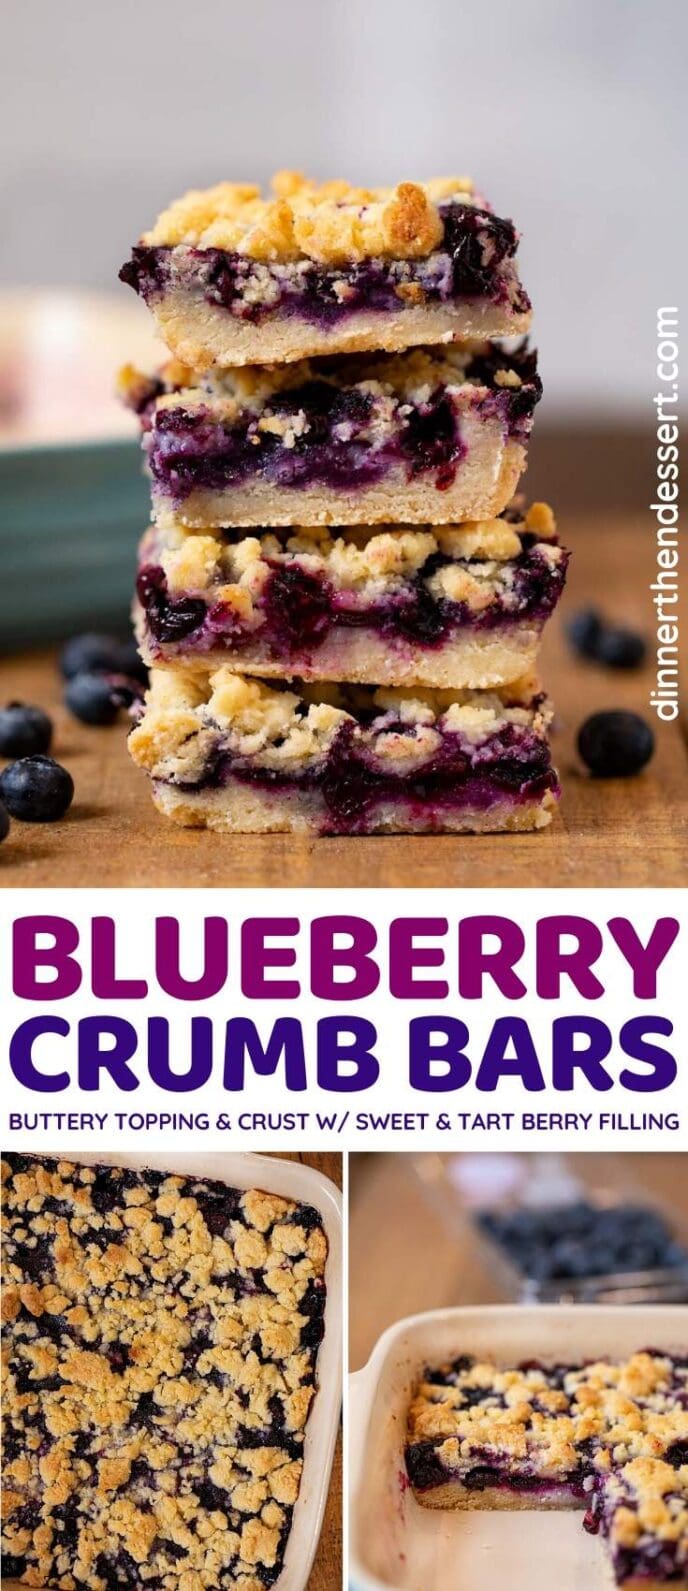 Blueberry Crumb Bars collage